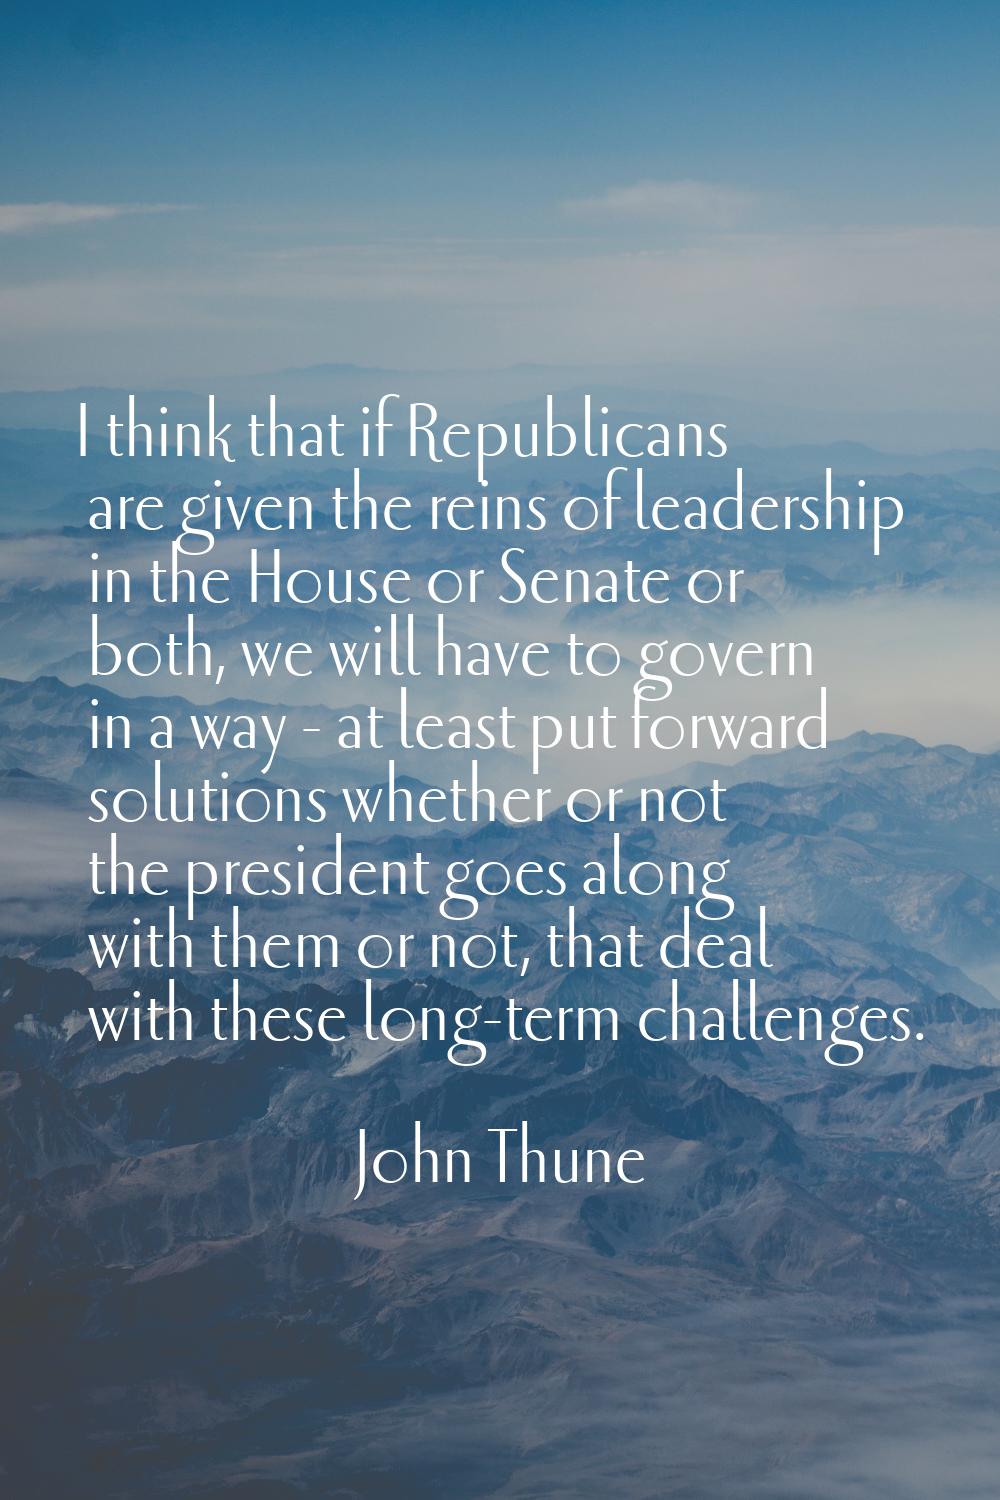 I think that if Republicans are given the reins of leadership in the House or Senate or both, we wi